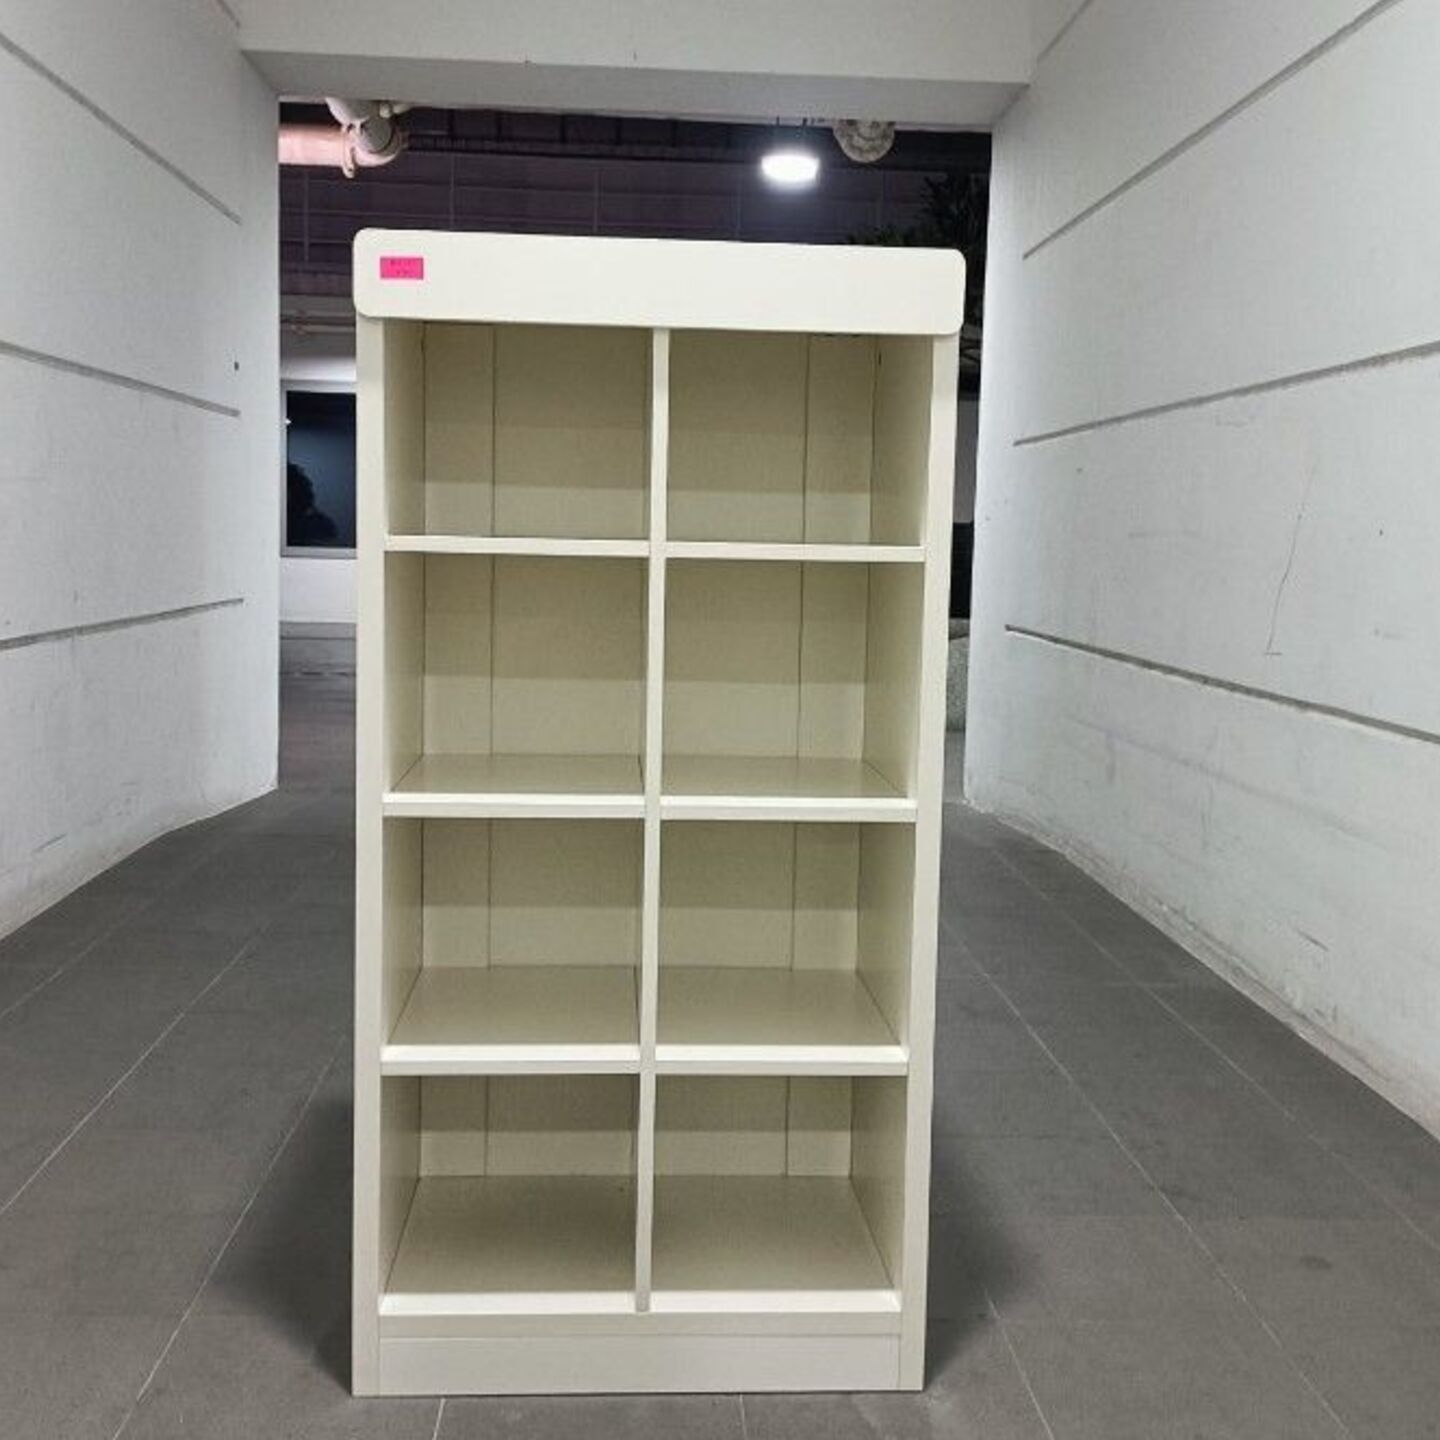 JAESONG Display Cabinet in WHITE